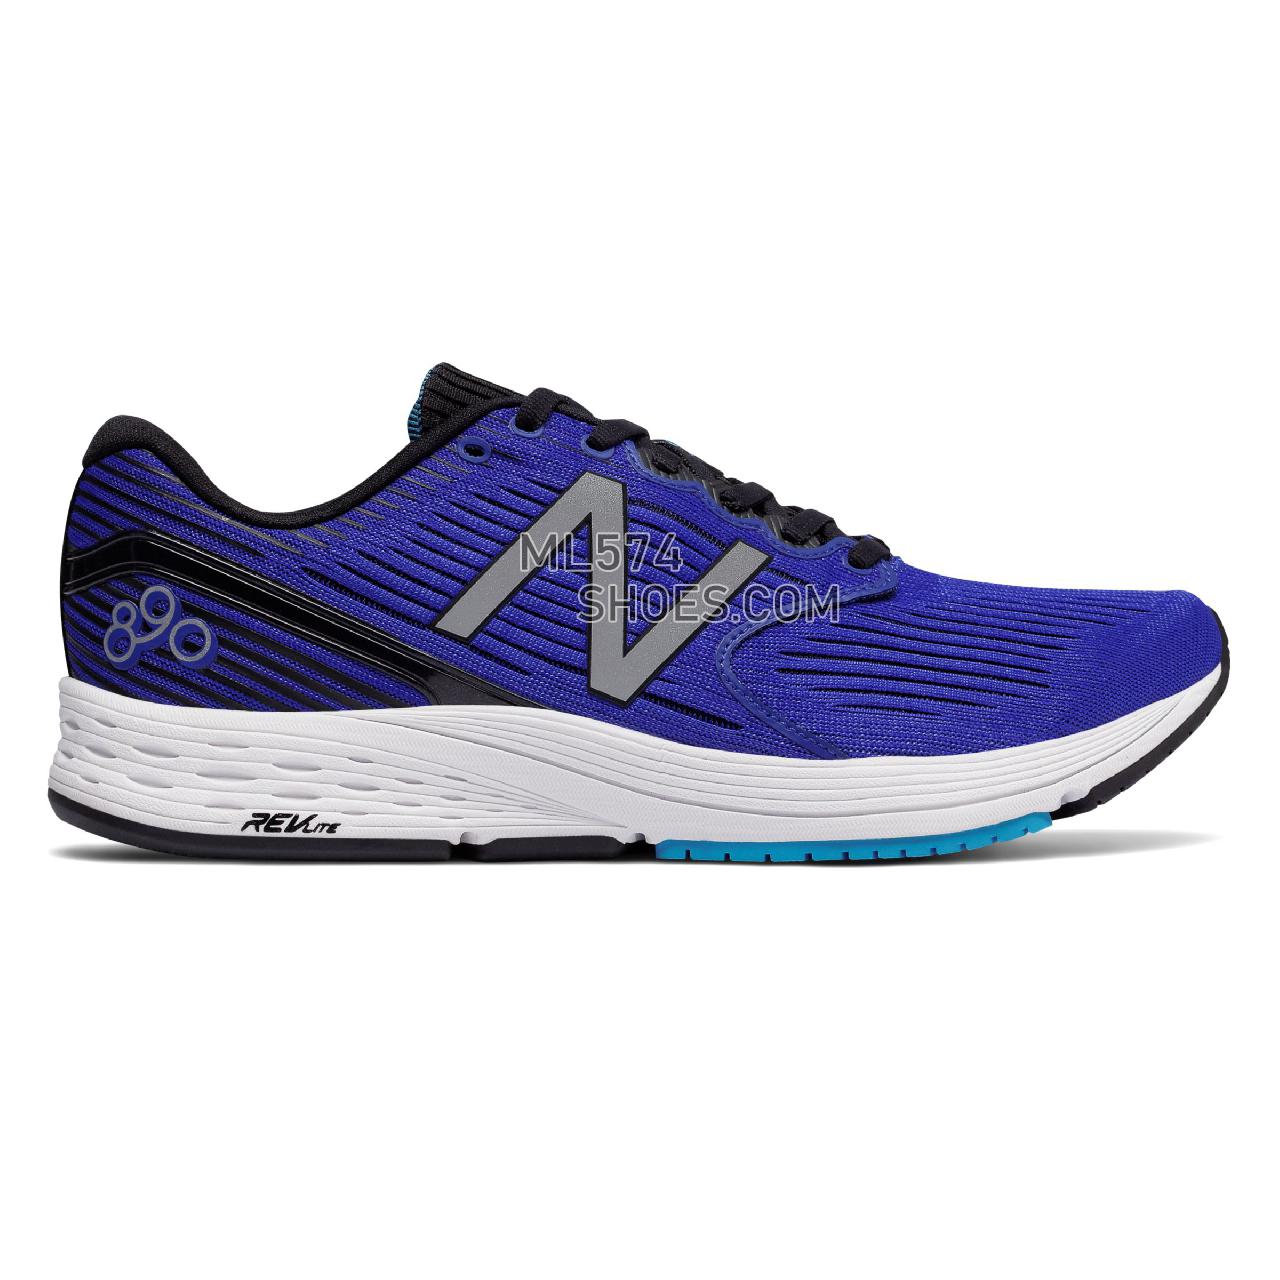 New Balance 890v6 - Men's 890 - Running Pacific with Maldives Blue and Black - M890BB6